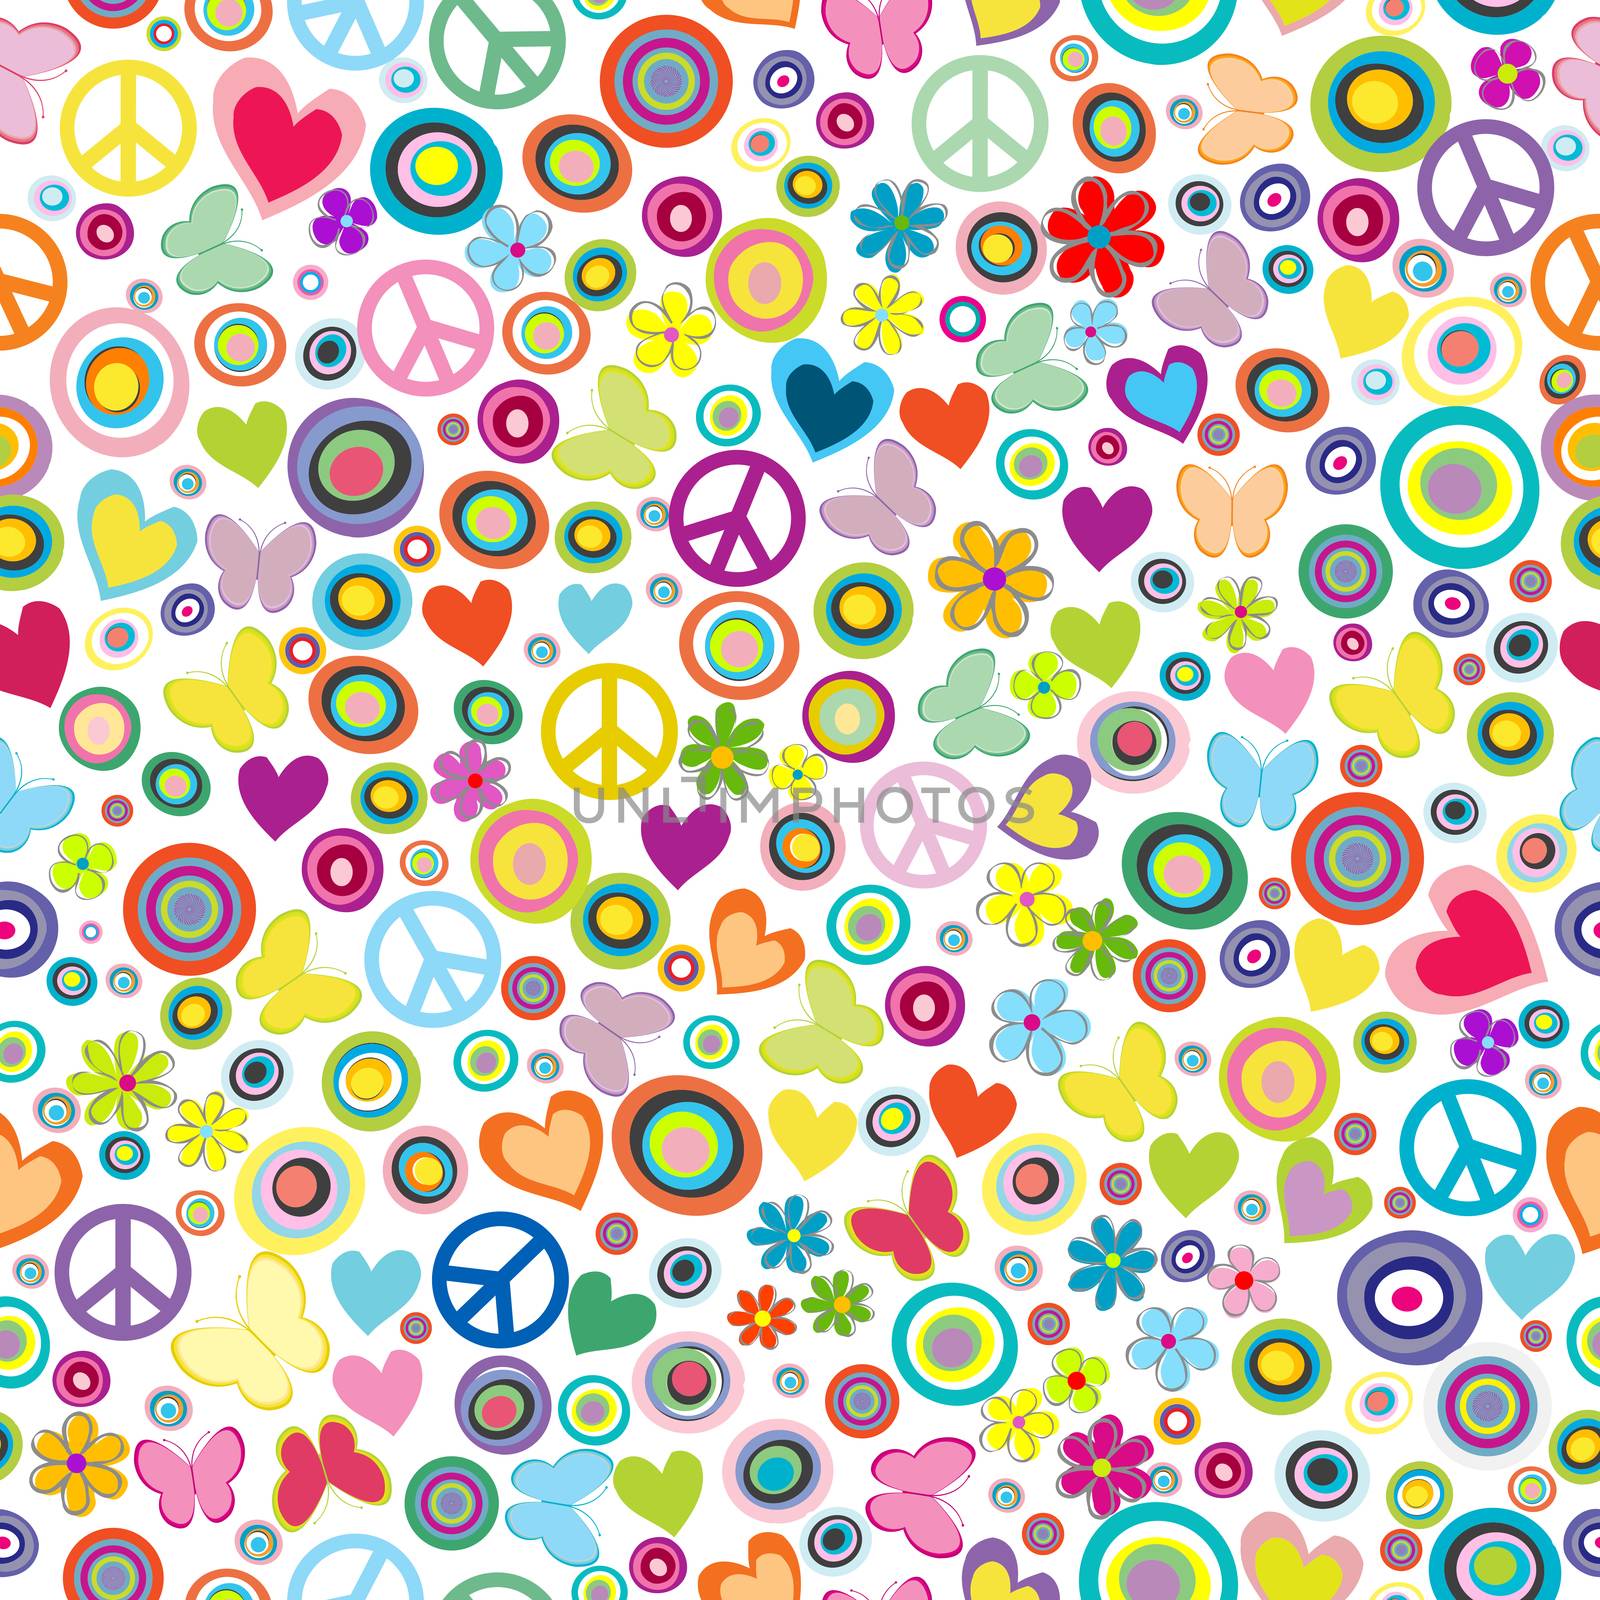 Flower power background seamless pattern with flowers, peace sig by hibrida13